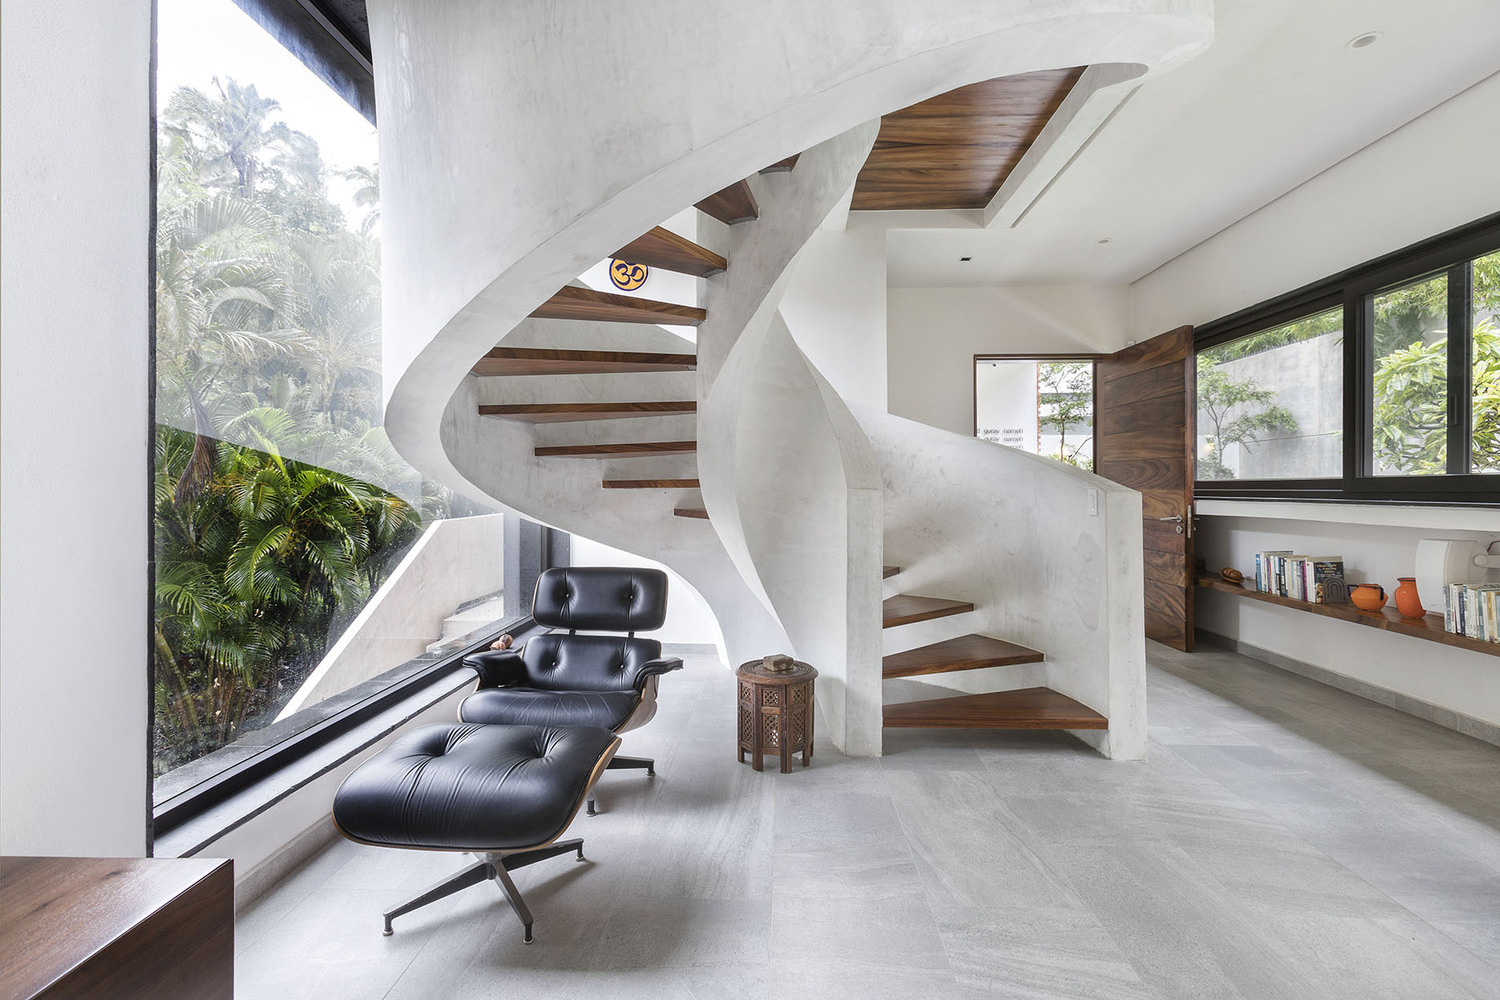 10 Types of Stairs: A Breakdown of Common Staircase Designs - 2023